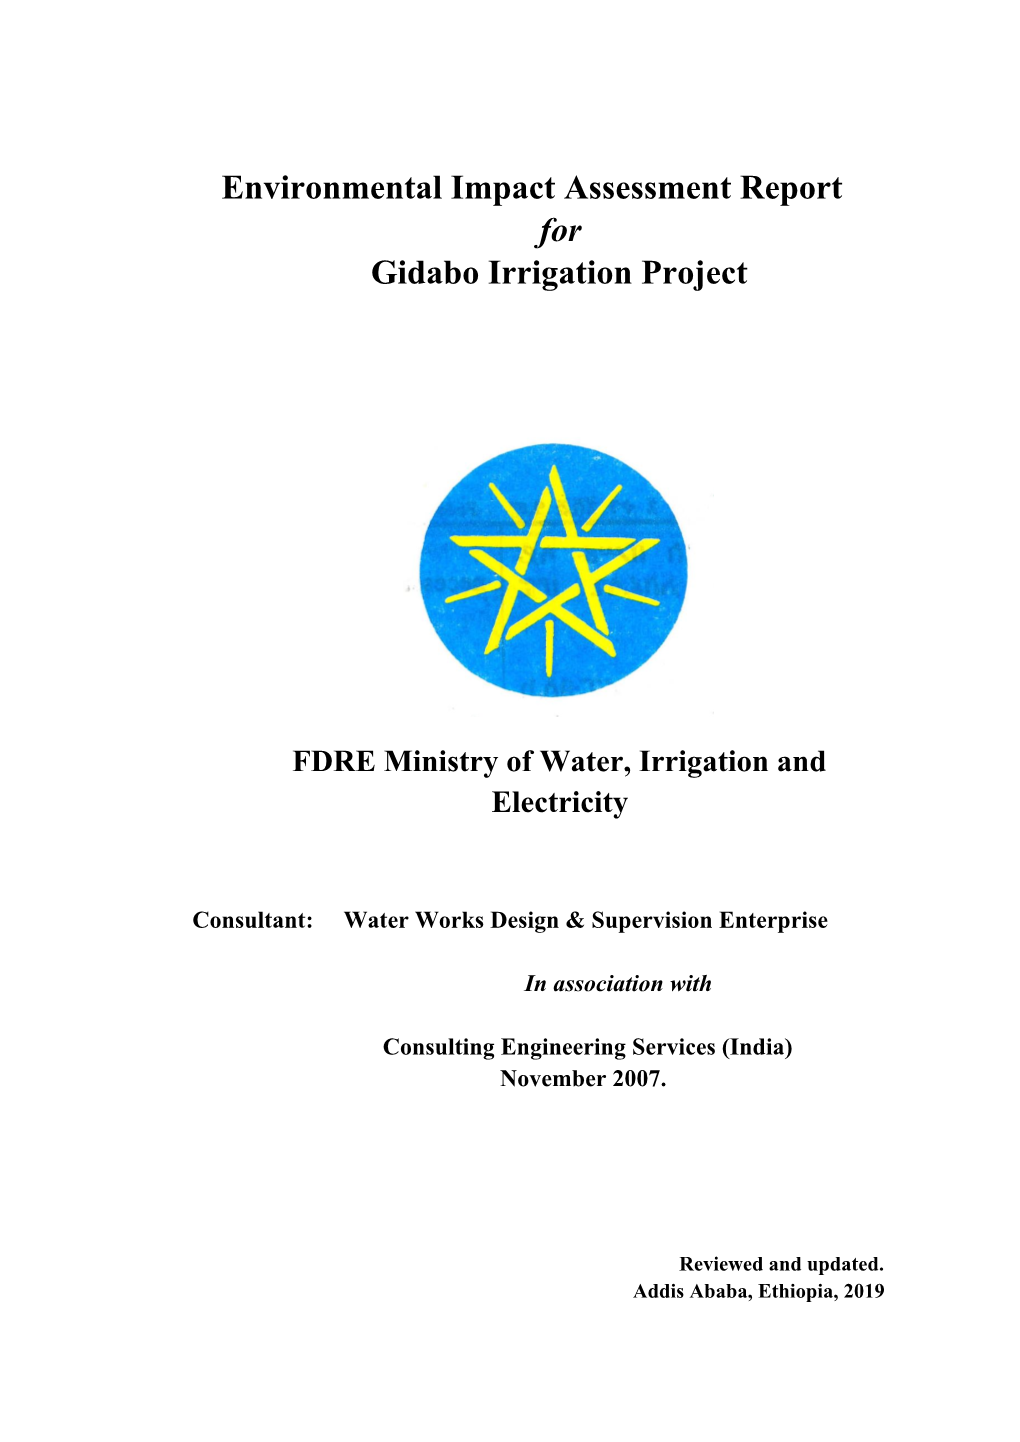 Environmental Impact Assessment Report for Gidabo Irrigation Project